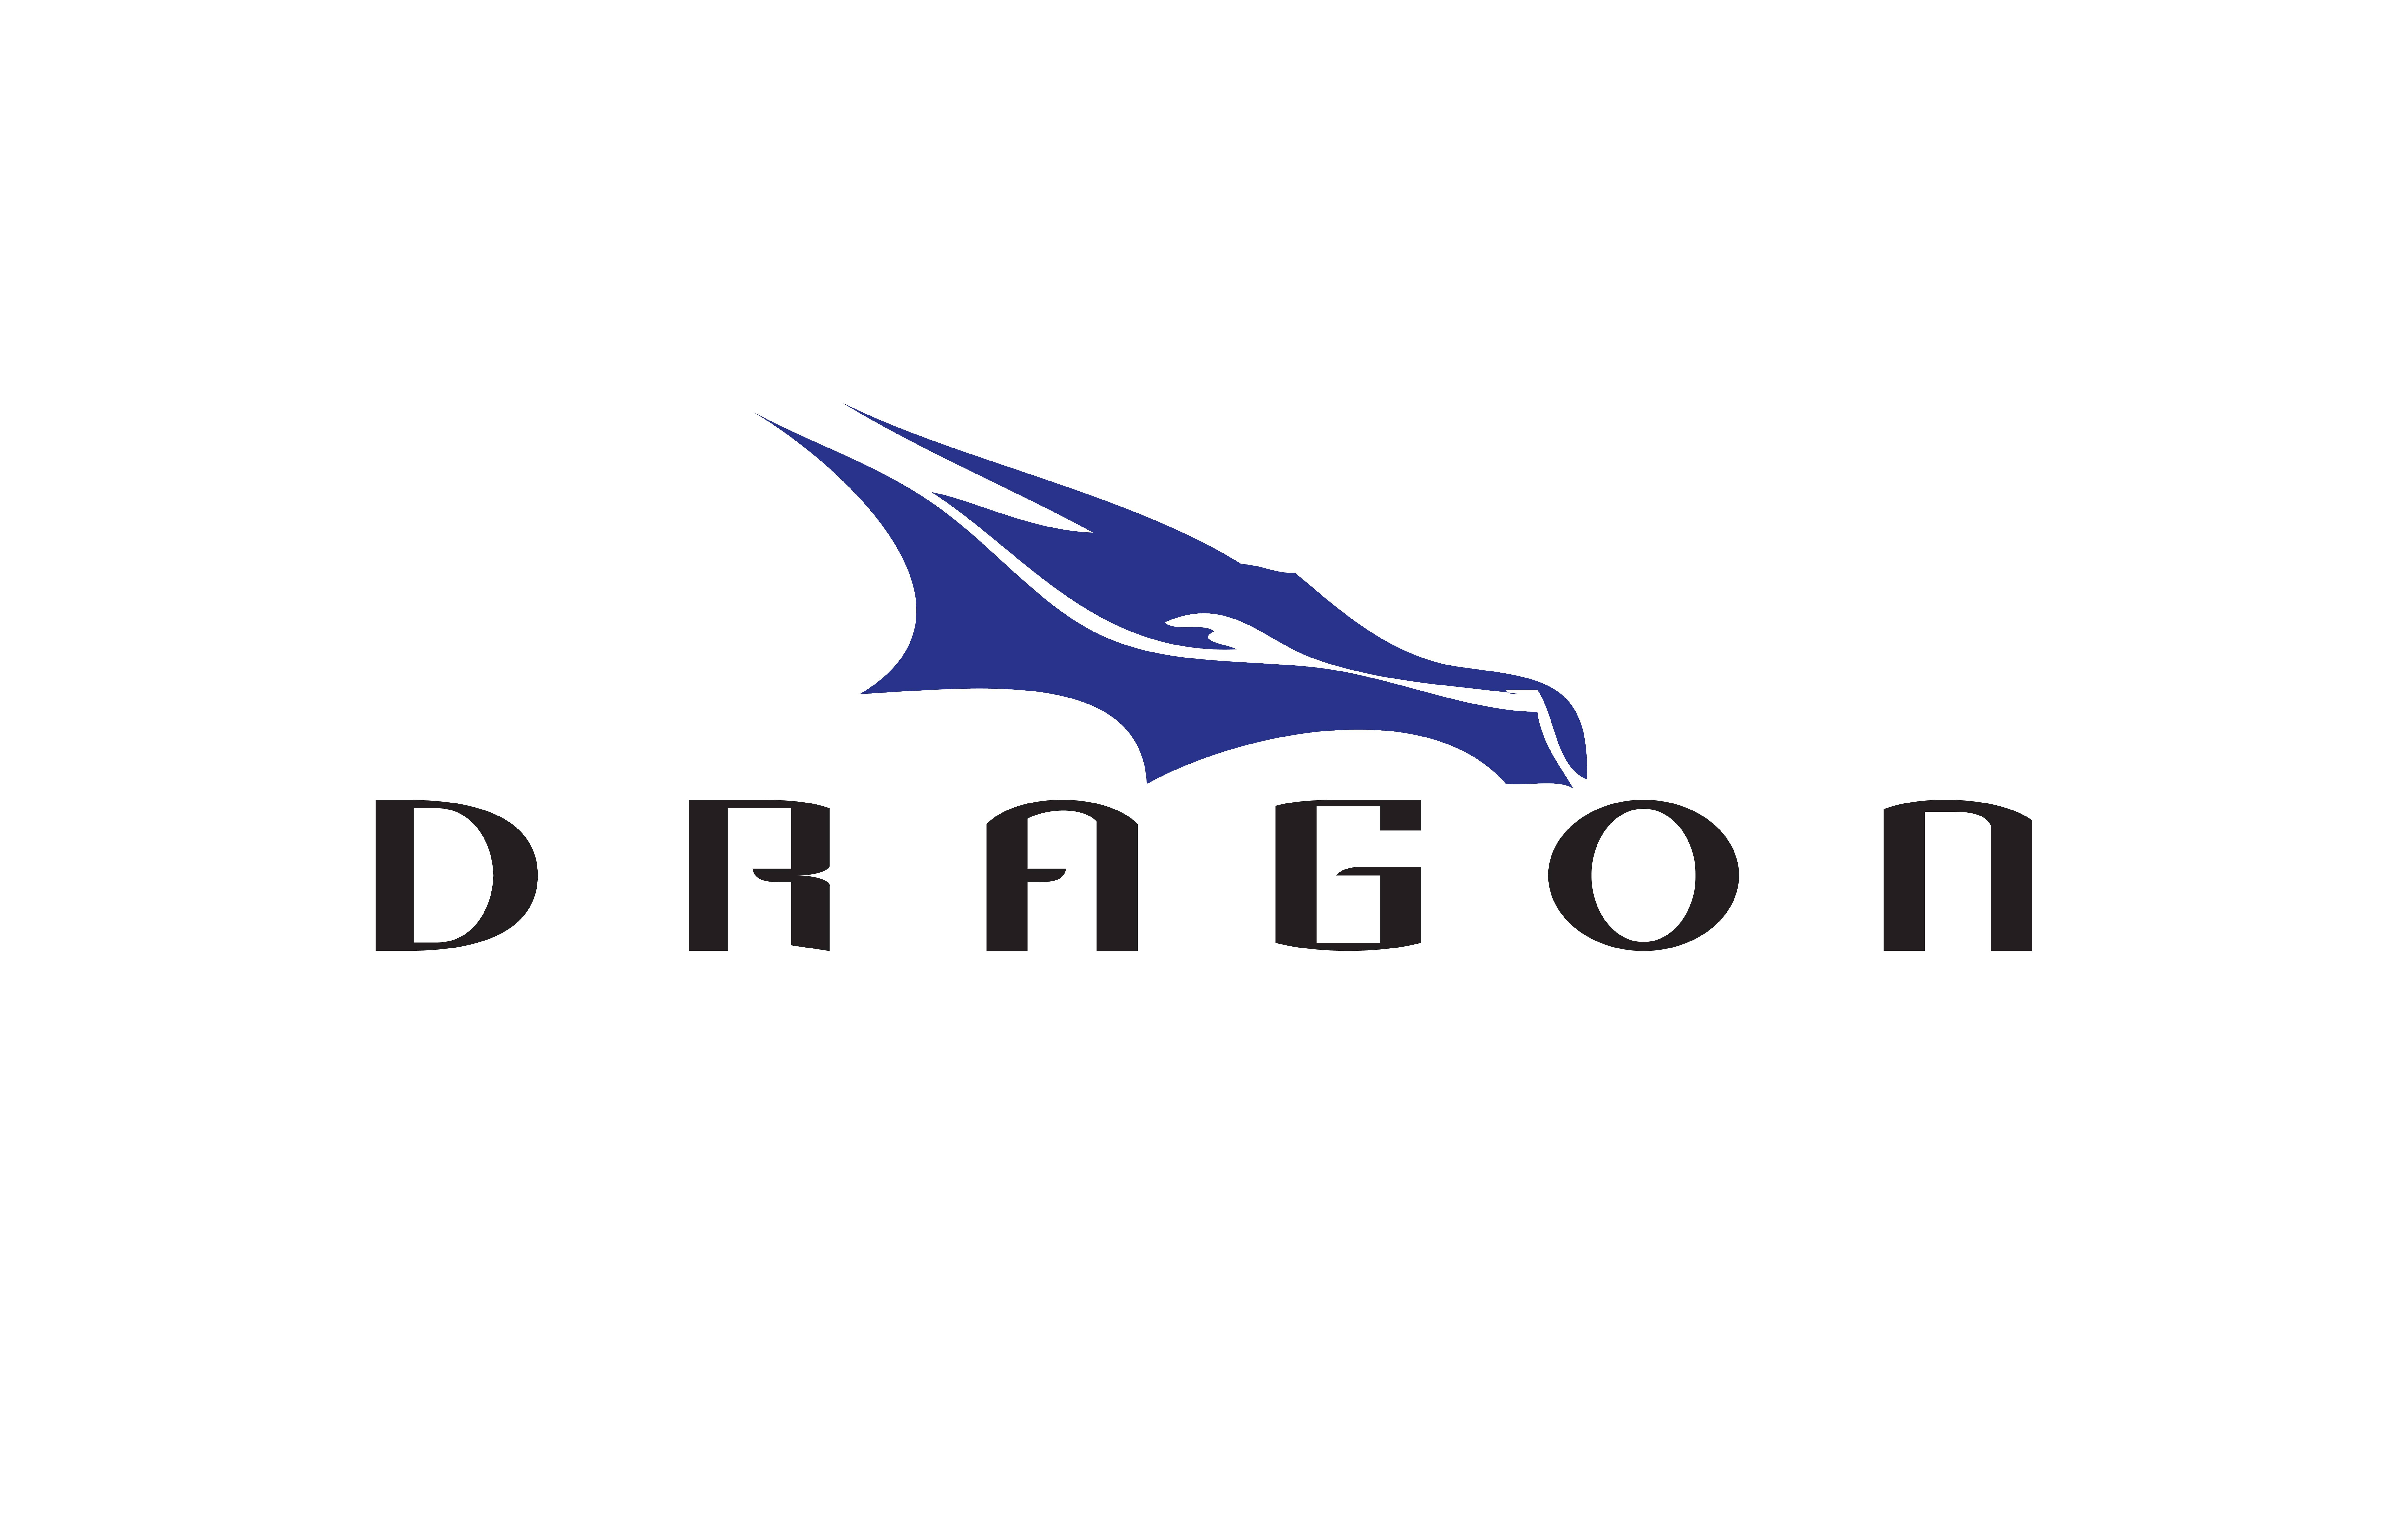 SpaceX Logo - SpaceX Dragon, what's new? - Space Exploration Stack Exchange